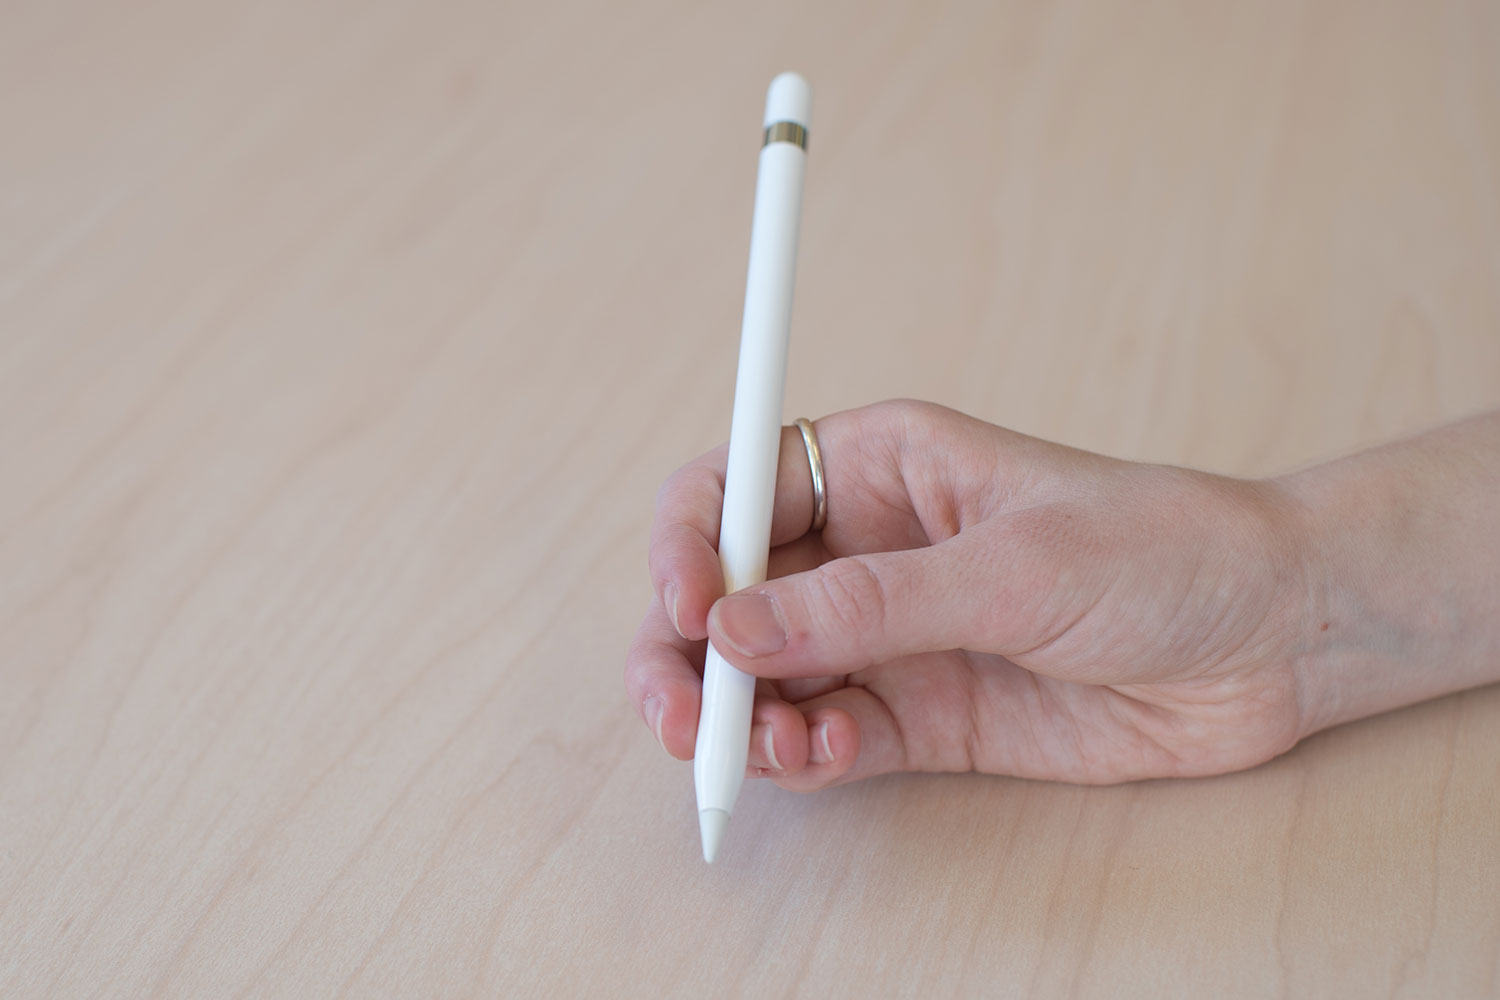 How to Find a Lost Apple Pencil with Your iPad: 1st & 2nd Gen